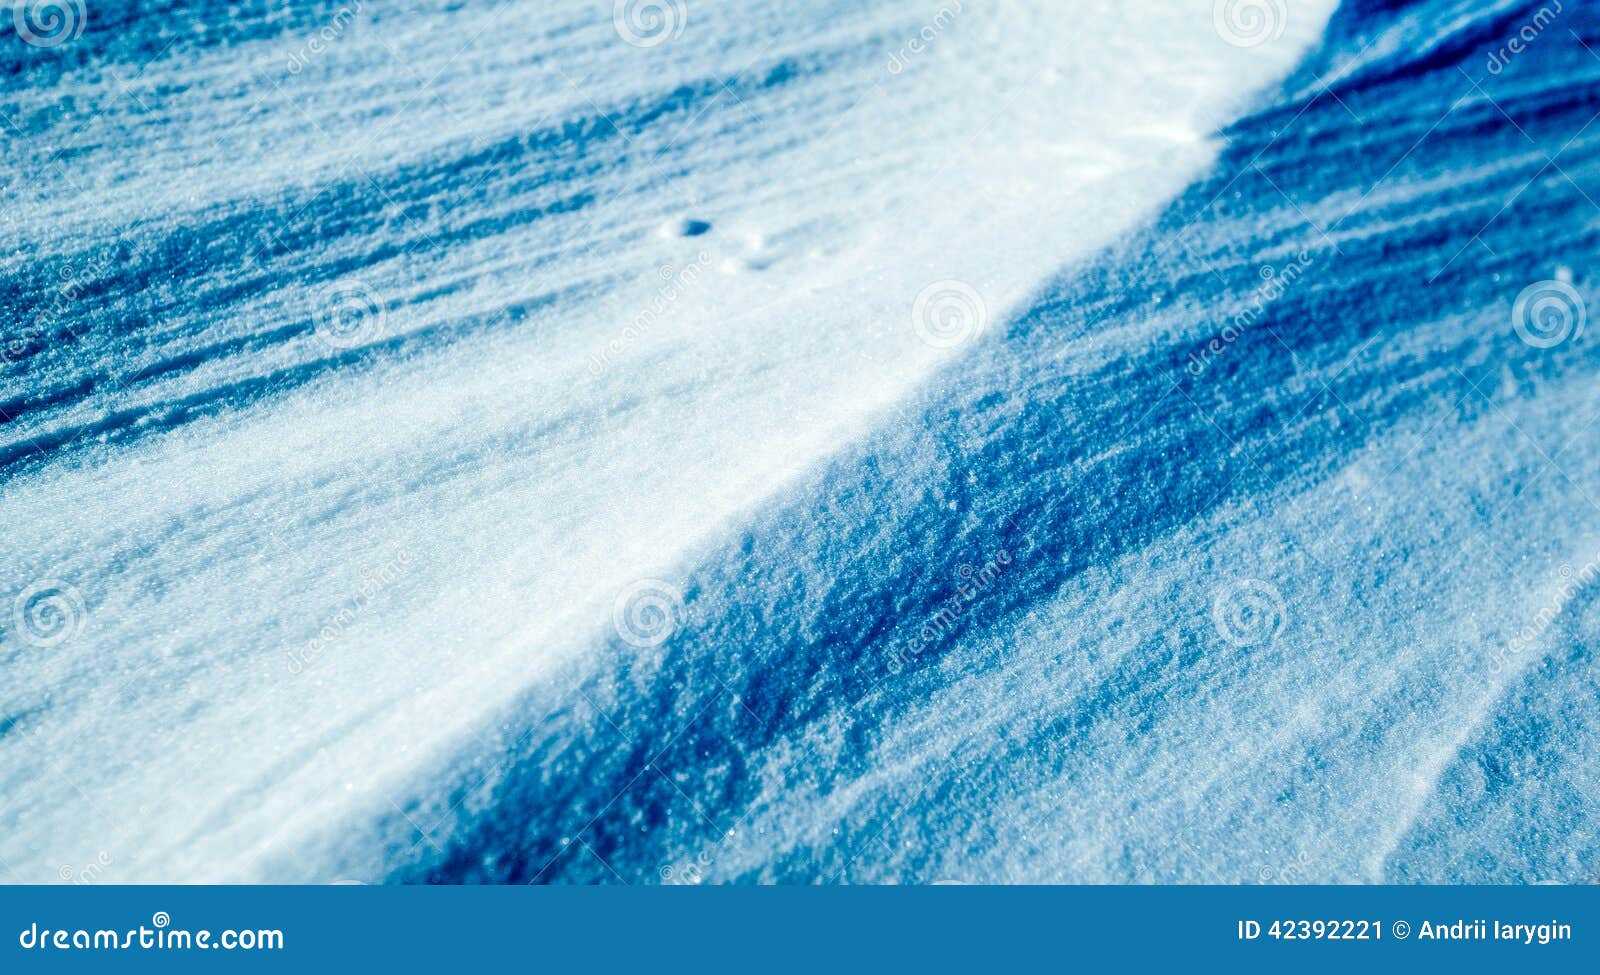 Snowy blue background stock image. Image of wave, wallpaper - 42392221